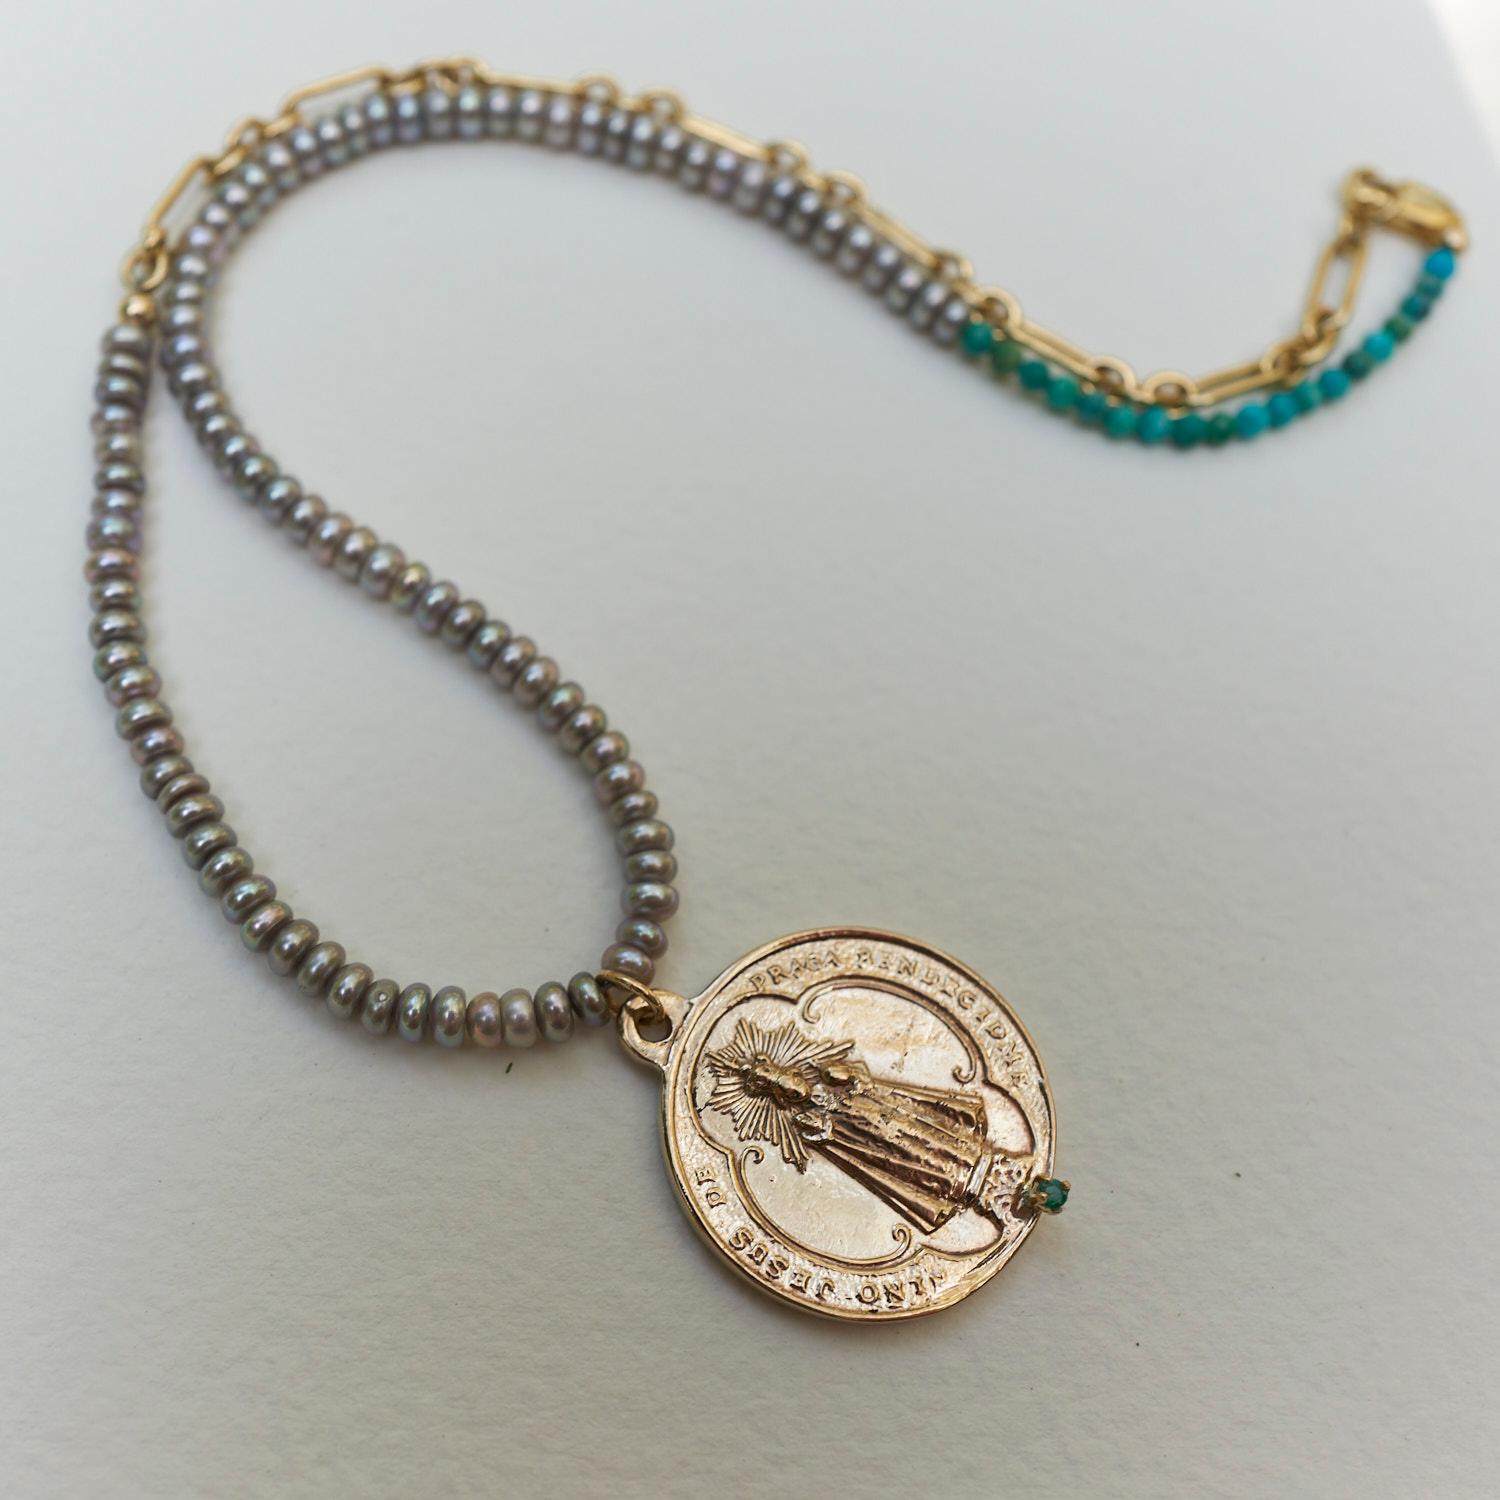 Emerald Medal Choker Chain Bead Necklace Pearl Turquoise J Dauphin
Coin is in bronze and Chain is gold-filled and has pearls and Turquoises.

Made in Los Angeles
Made to order 3-4 weeks to be completed
